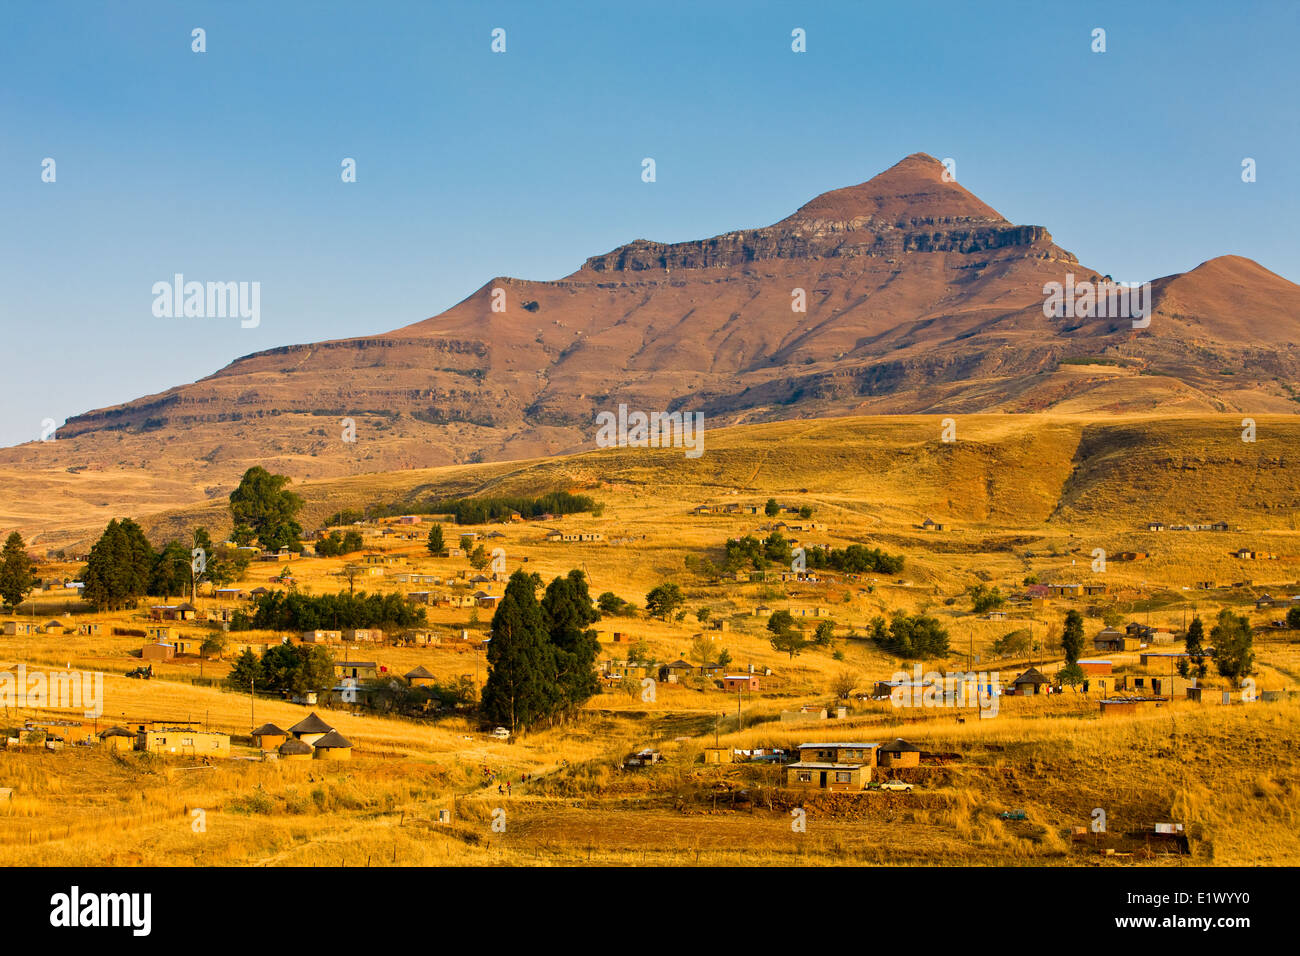 Mont Aux Sources near Bergville, mountains of the Drakensberg, Kwazulu-Natal, South Africa Stock Photo